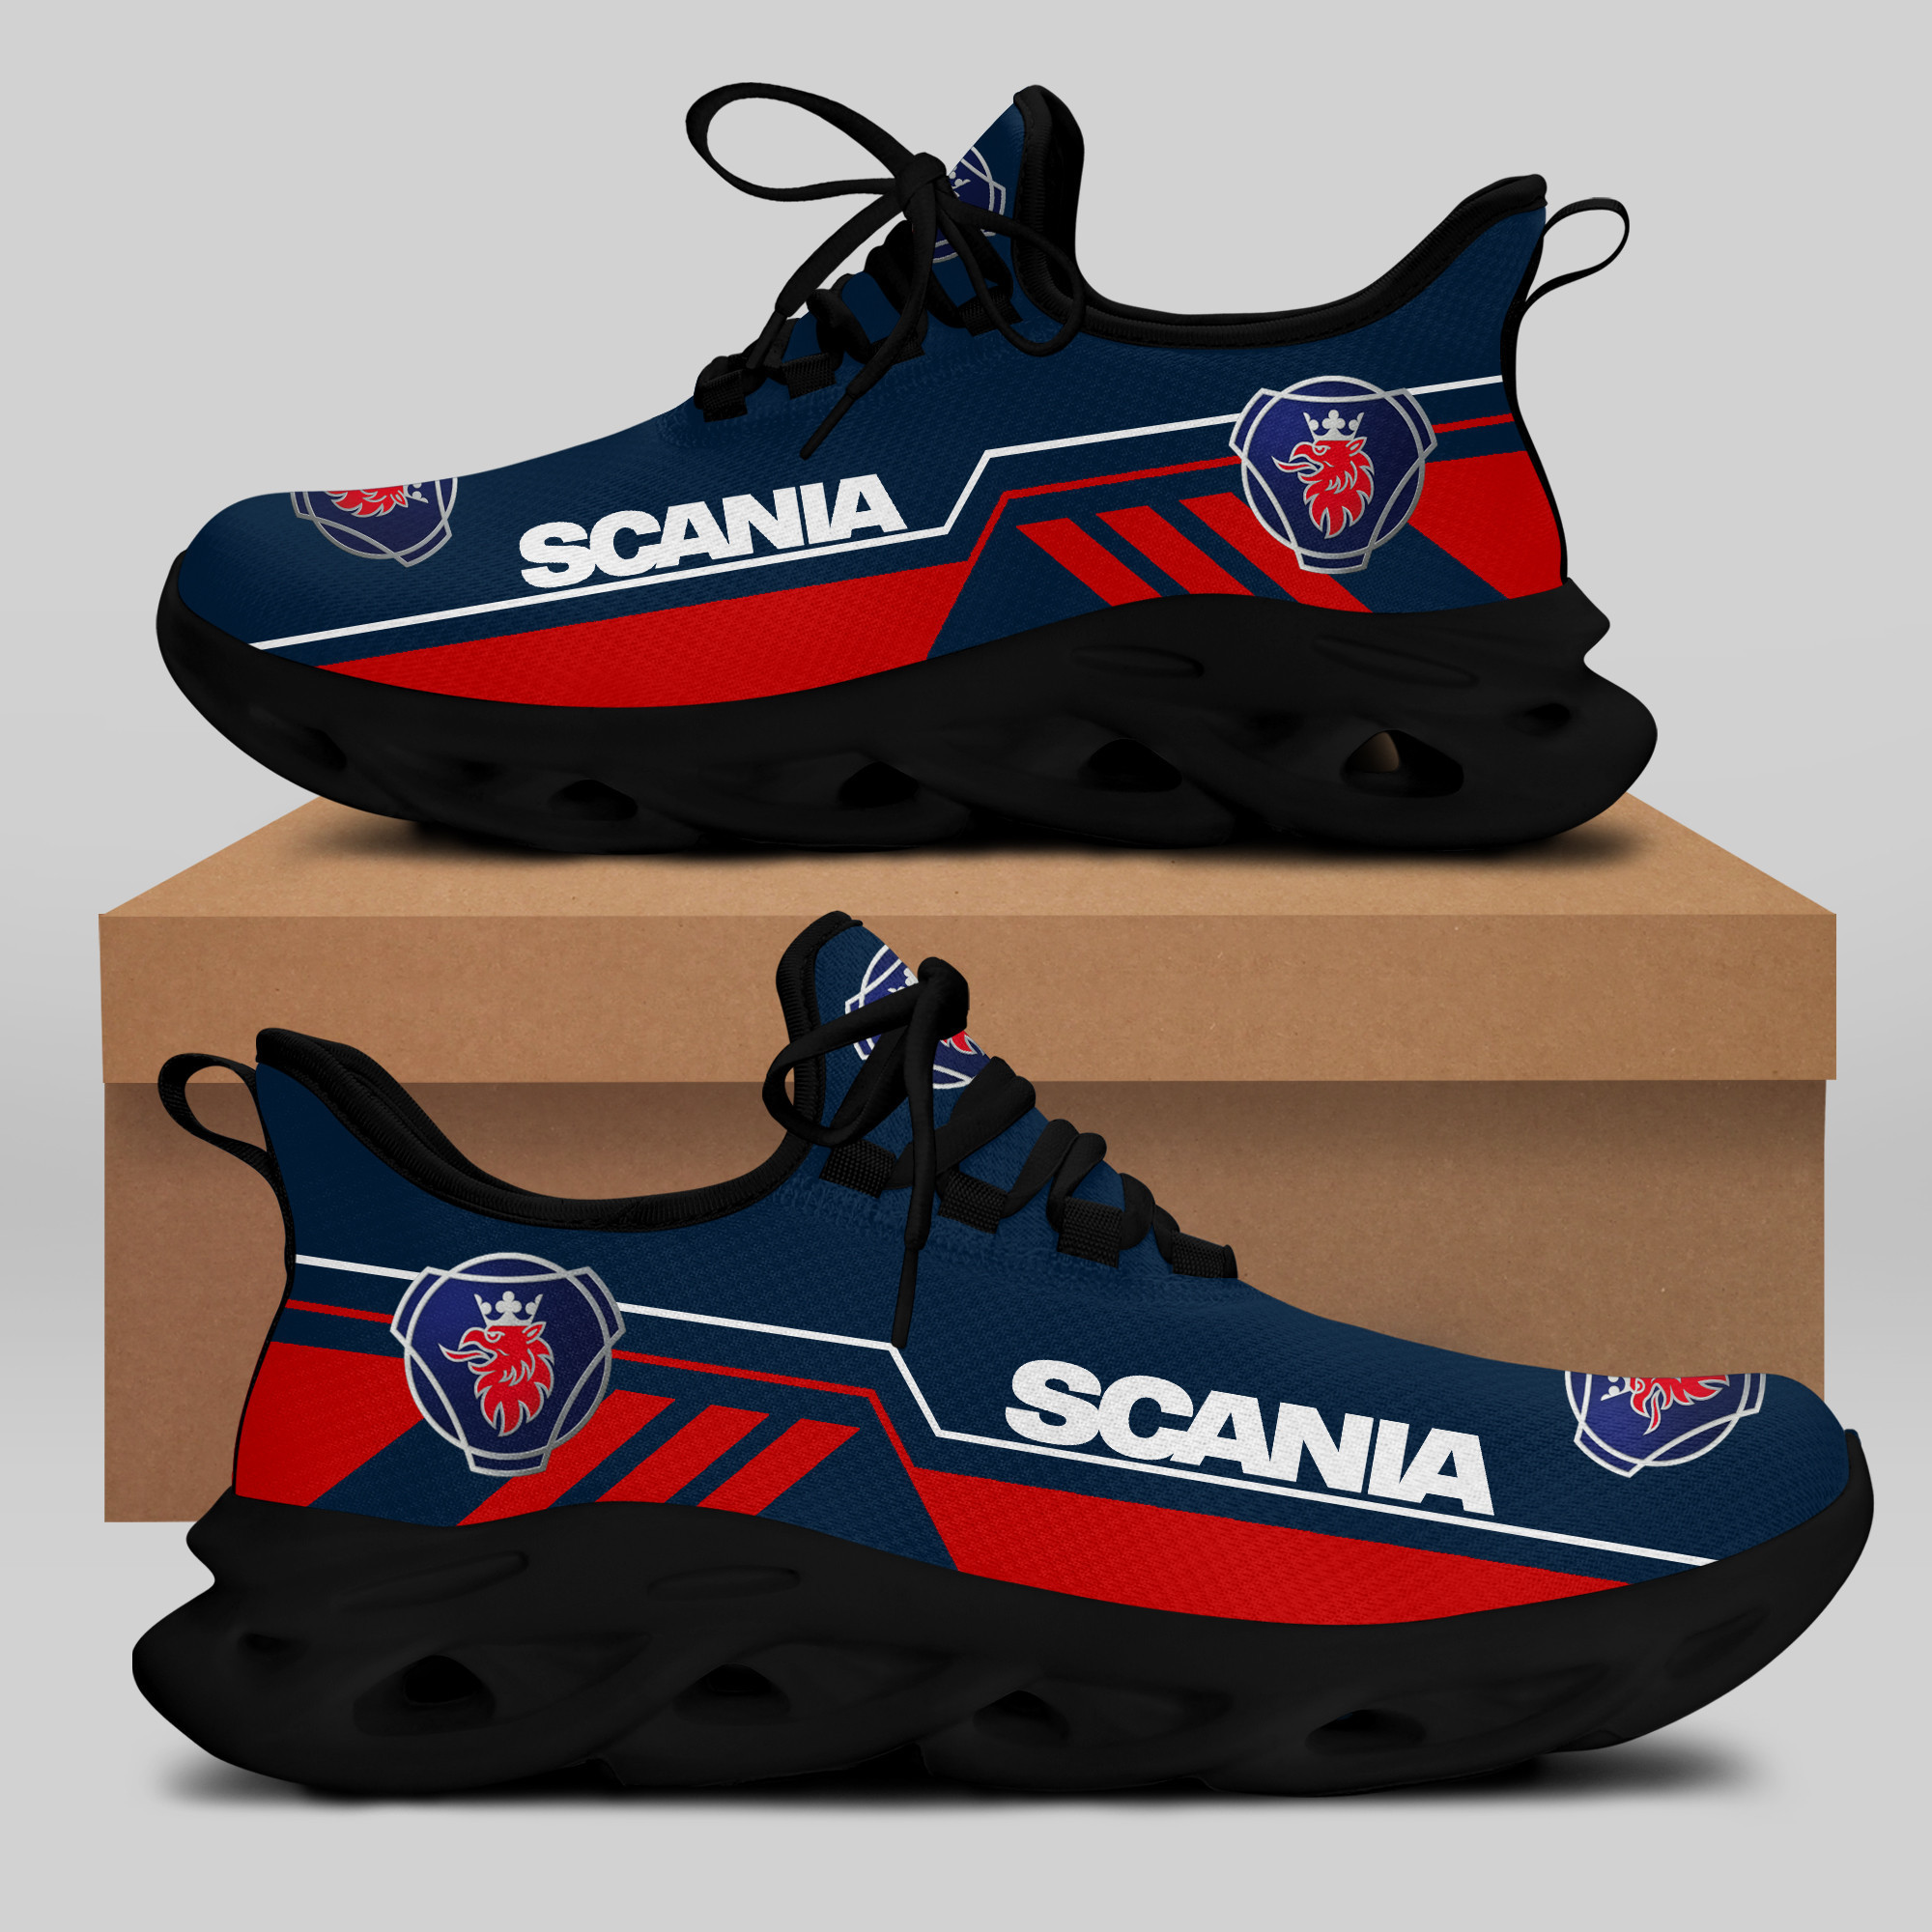 SCANIA RUNNING SHOES VER 11